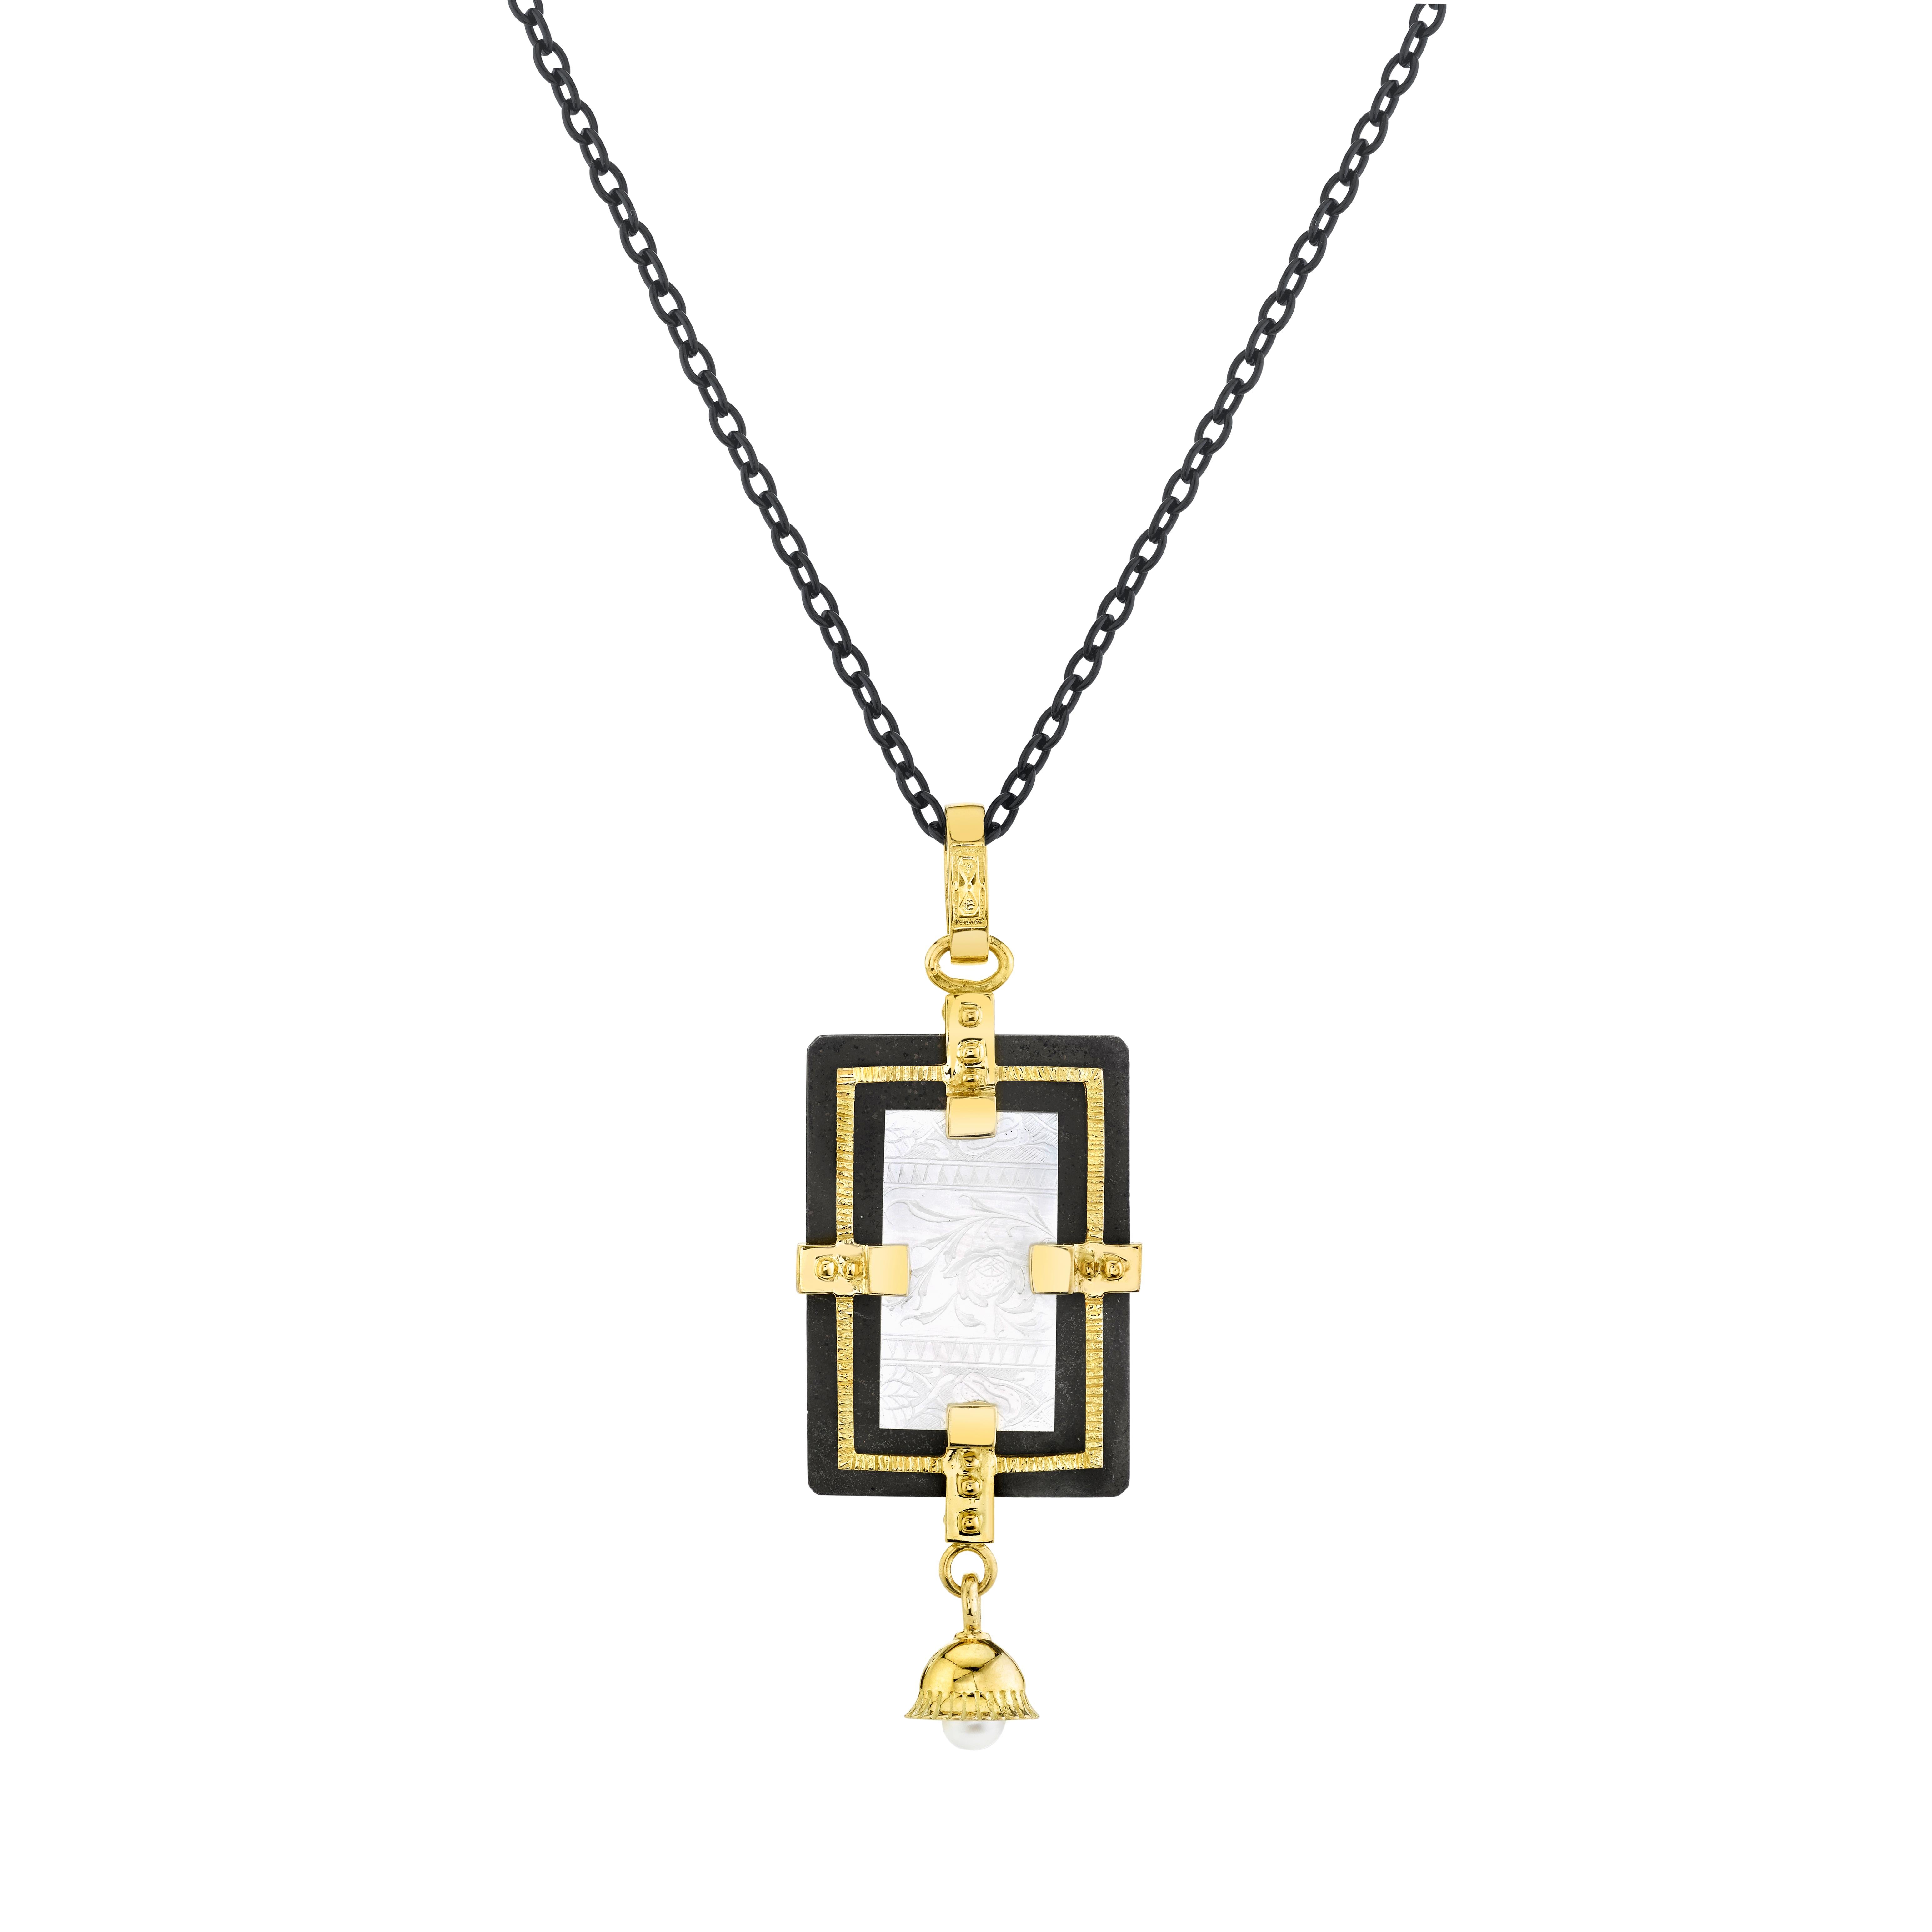 Taille mixte Antiquities Nacre Gaming Counter Or Jaune Argent Pendentif Steel Chain en vente